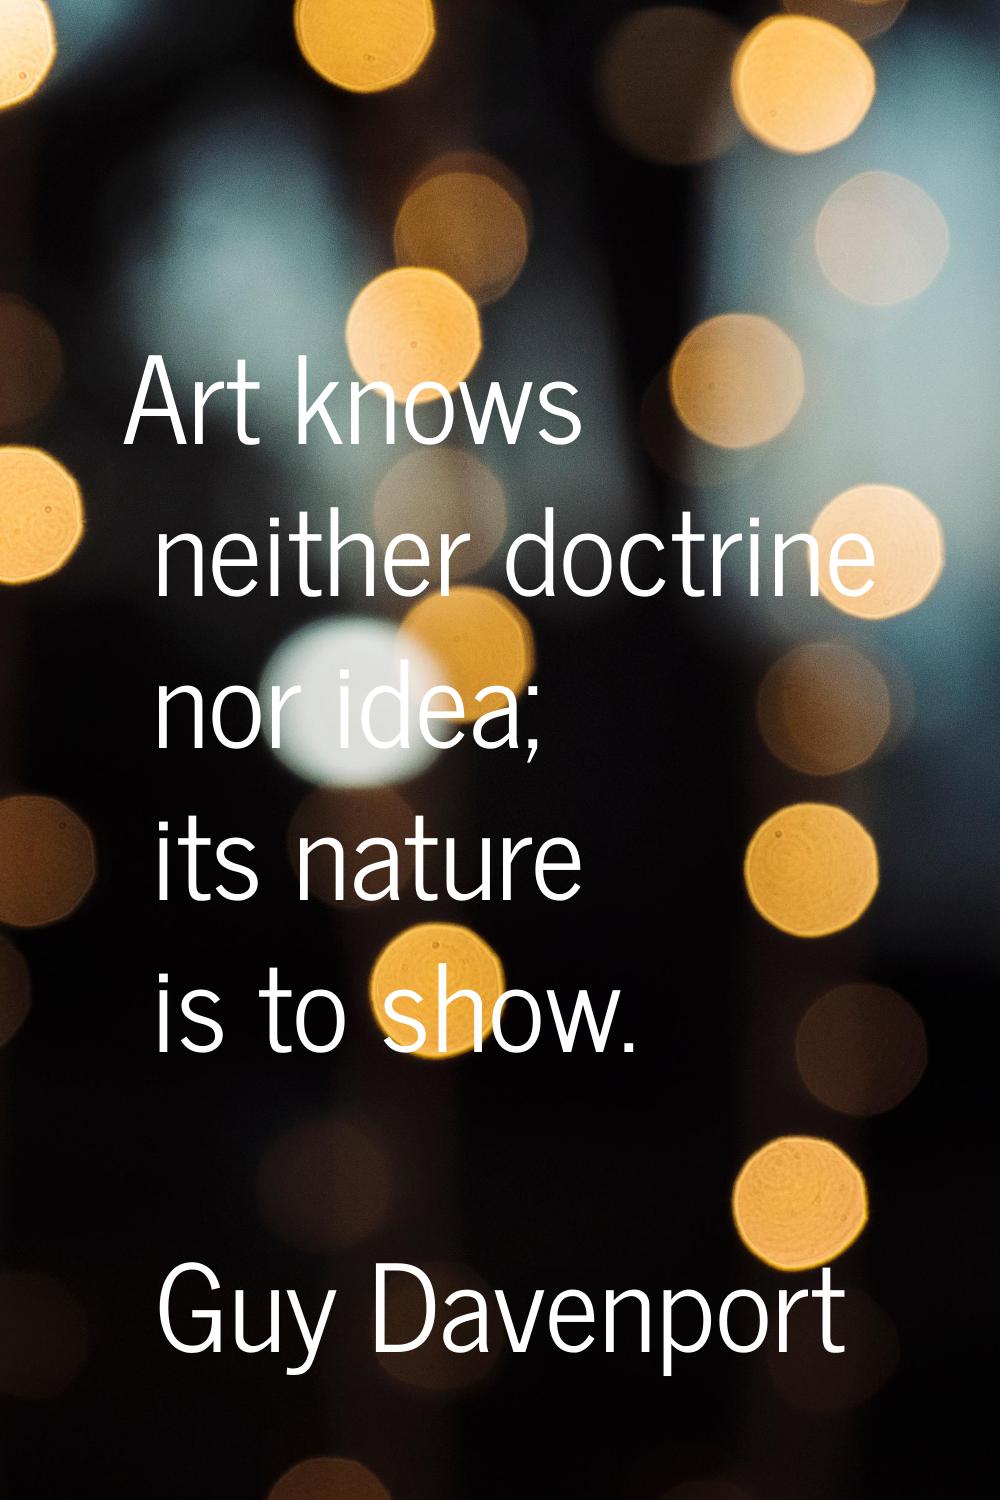 Art knows neither doctrine nor idea; its nature is to show.